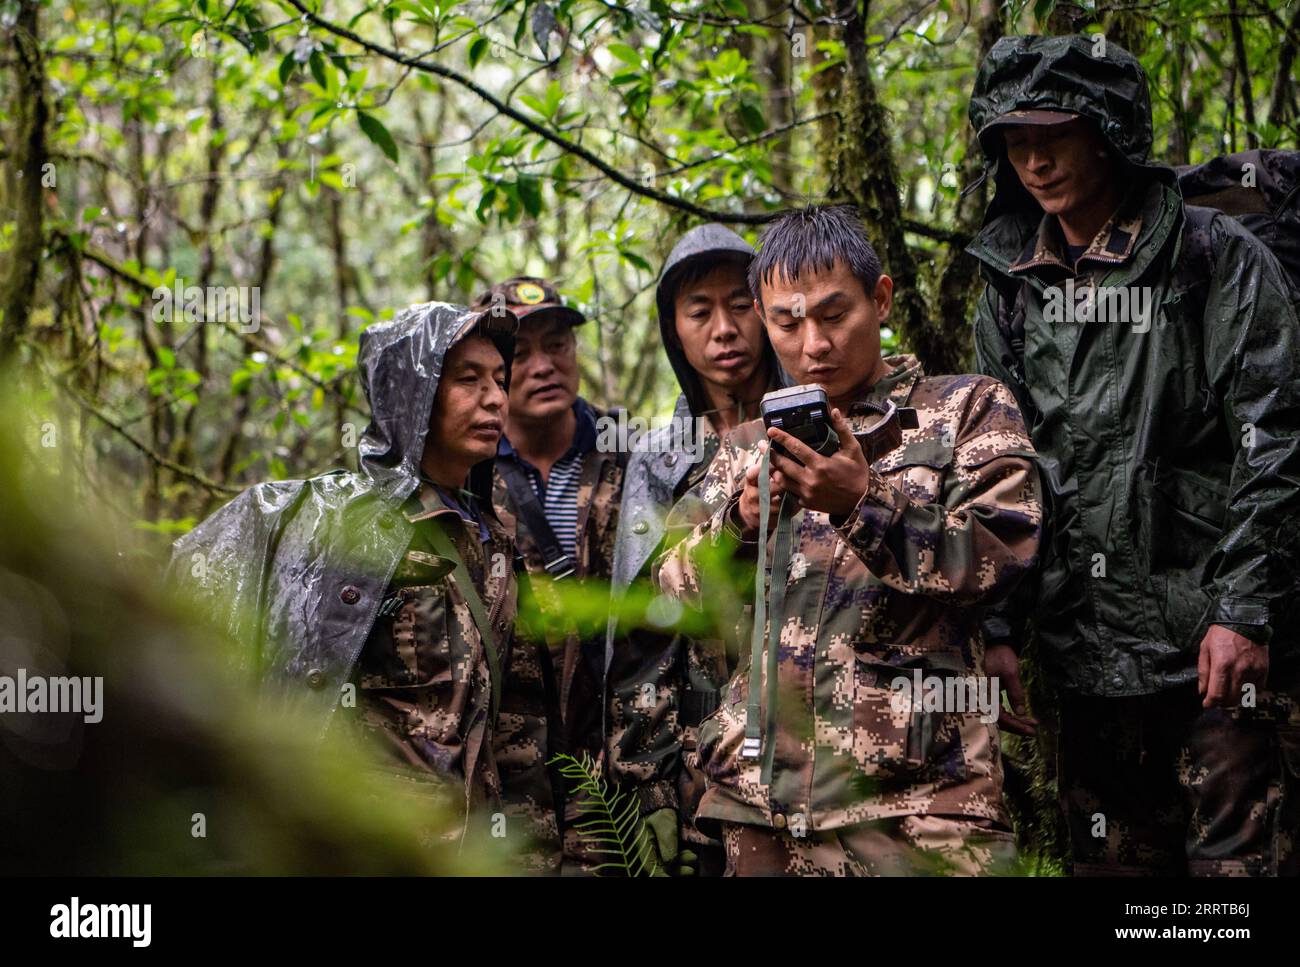 230712 -- LUSHUI, July 12, 2023 -- Rangers examine an infrared camera during a patrol at the Gaoligongshan national nature reserve in southwest China s Yunnan Province, July 9, 2023. Gaoligongshan mountains, where about 17 percent of China s higher plants species, 30 percent of mammal species and over 35 percent of birds species are found, is an important showcase of the country s biodiversity protection. In 2011, the Nujiang Golden Monkey, the fifth golden monkey species in the world, was also found here. He Guipin, a ranger of the Lushui branch of the Gaoligongshan national nature reserve, h Stock Photo